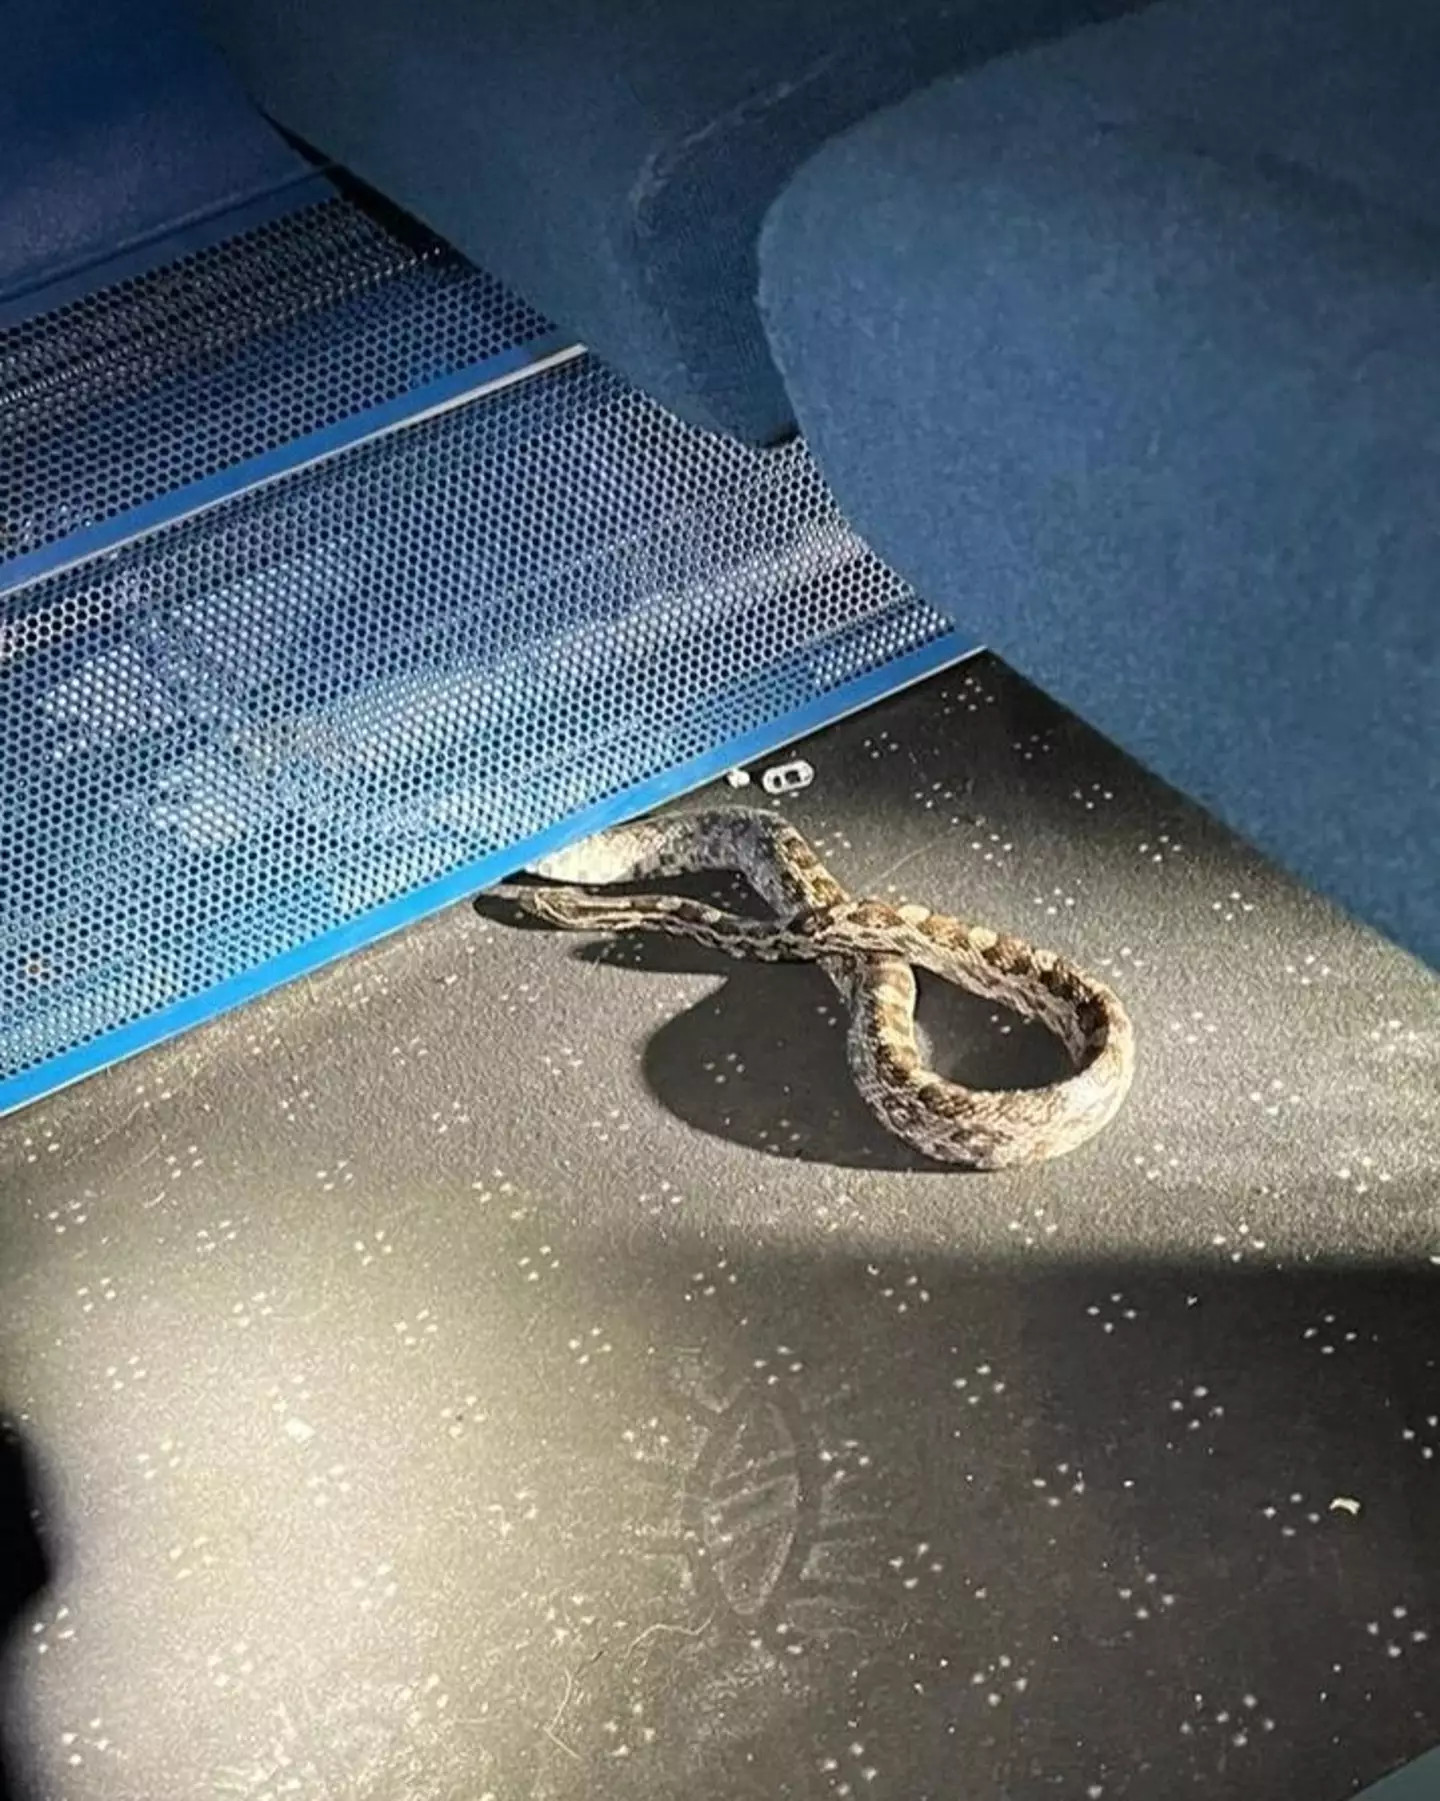 The snake was found by cleaners on the Southern Railway train.